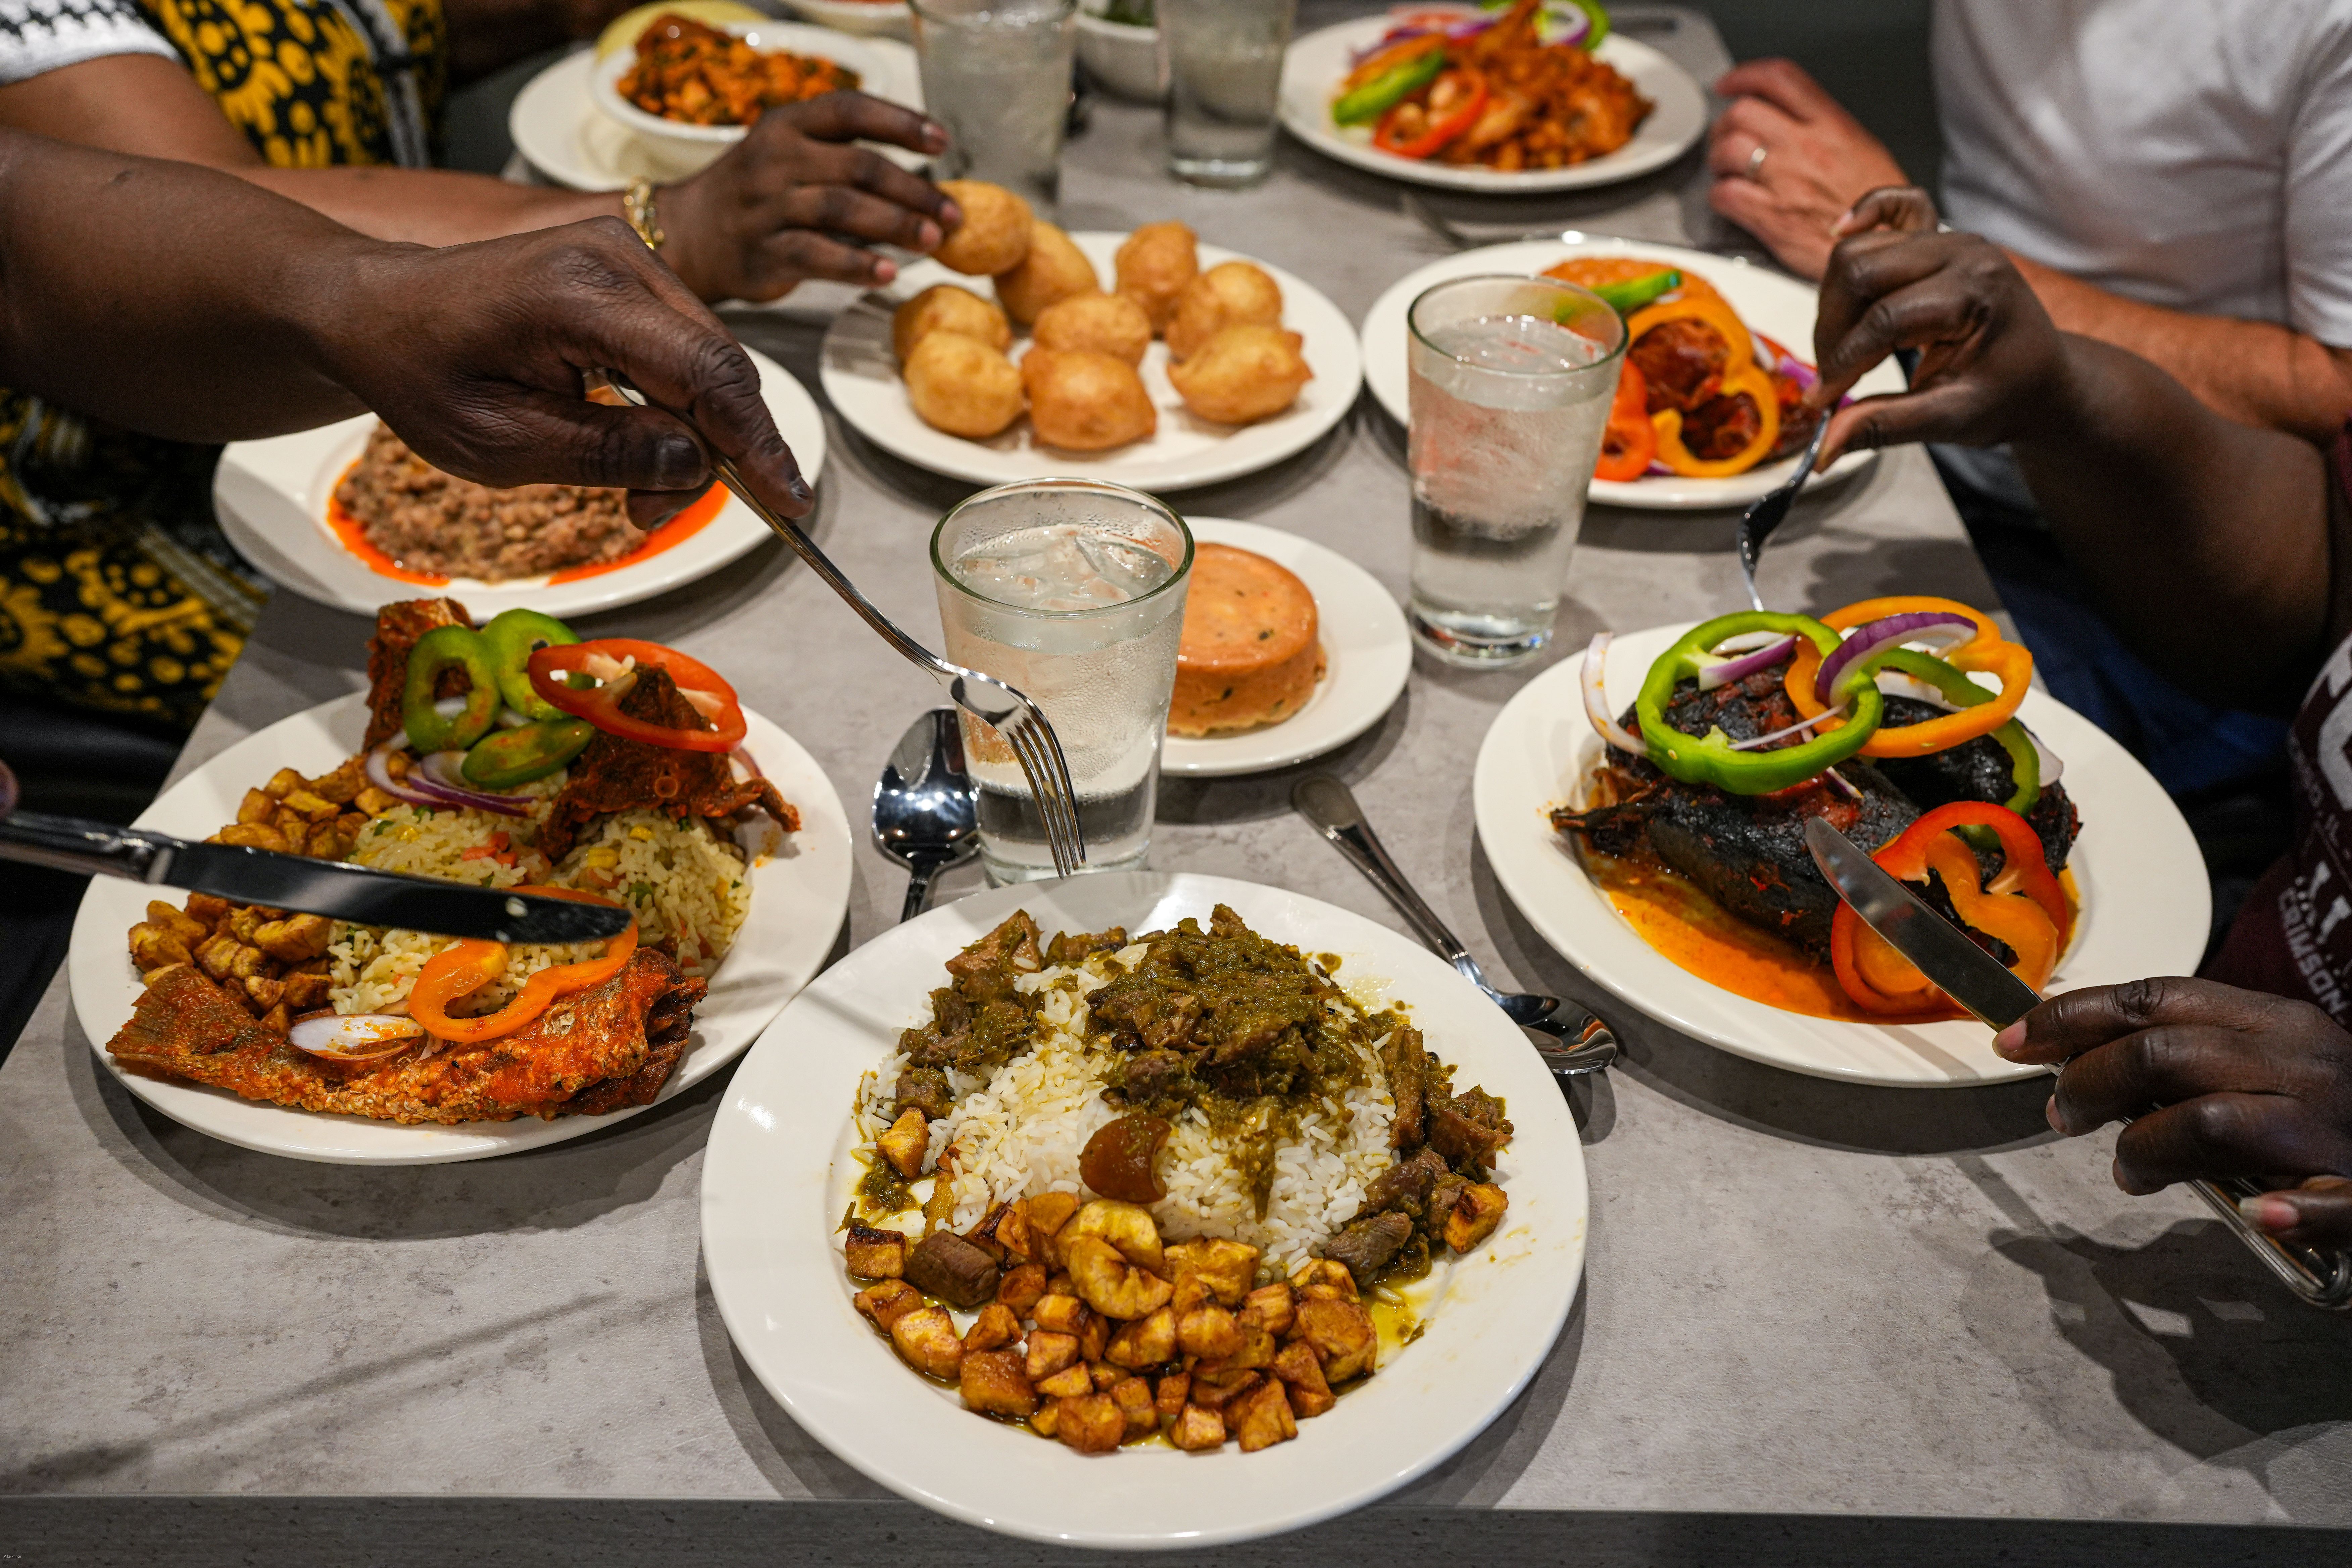 A dining room table with several diners eating African dishes that includes asun (grilled goat meat with spices), jolloff rice, and peppered snail.